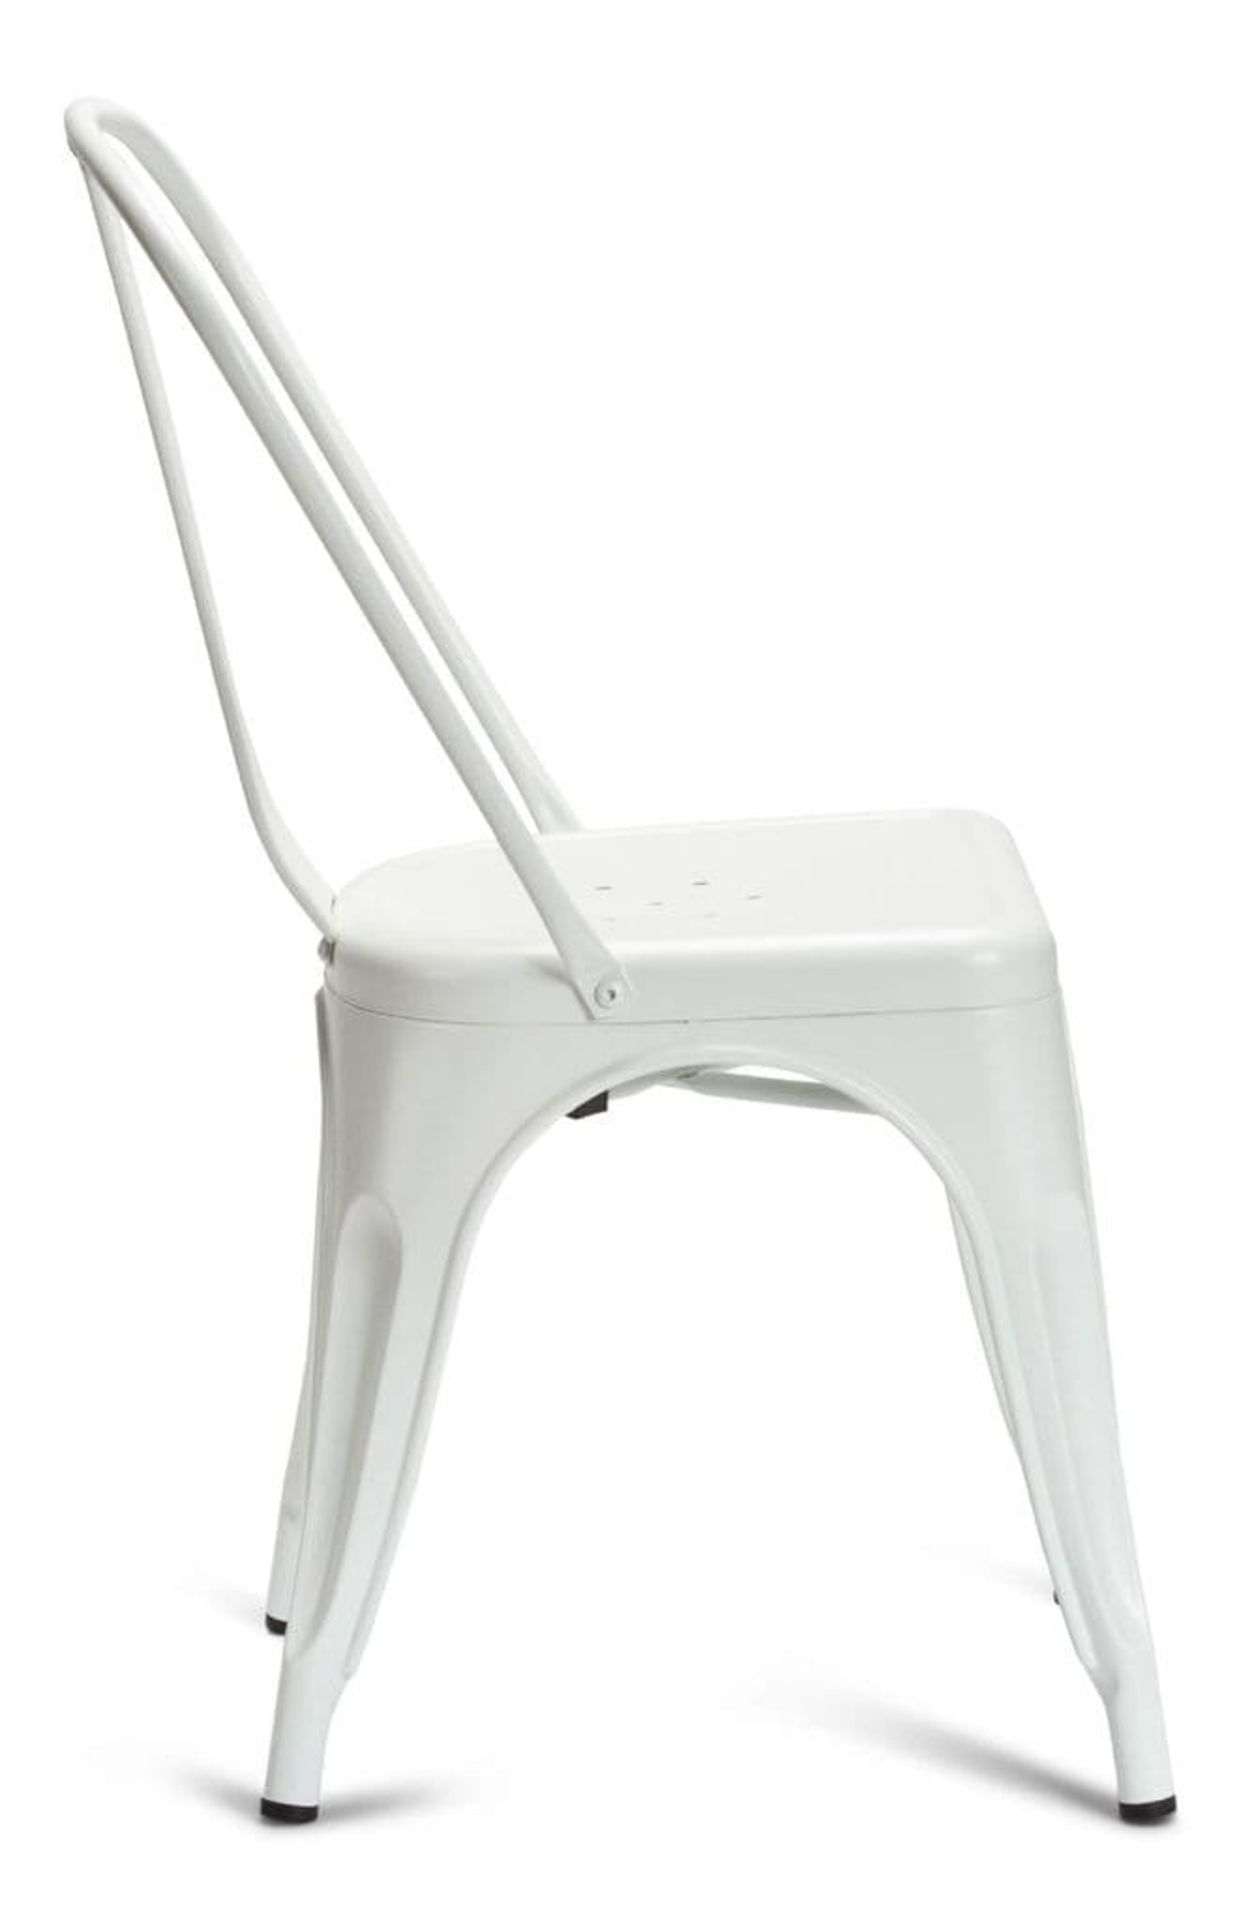 1 x Tolix Industrial Style Outdoor Bistro Table and Chair Set in White- Includes 1 x Table and 4 x - Image 10 of 14